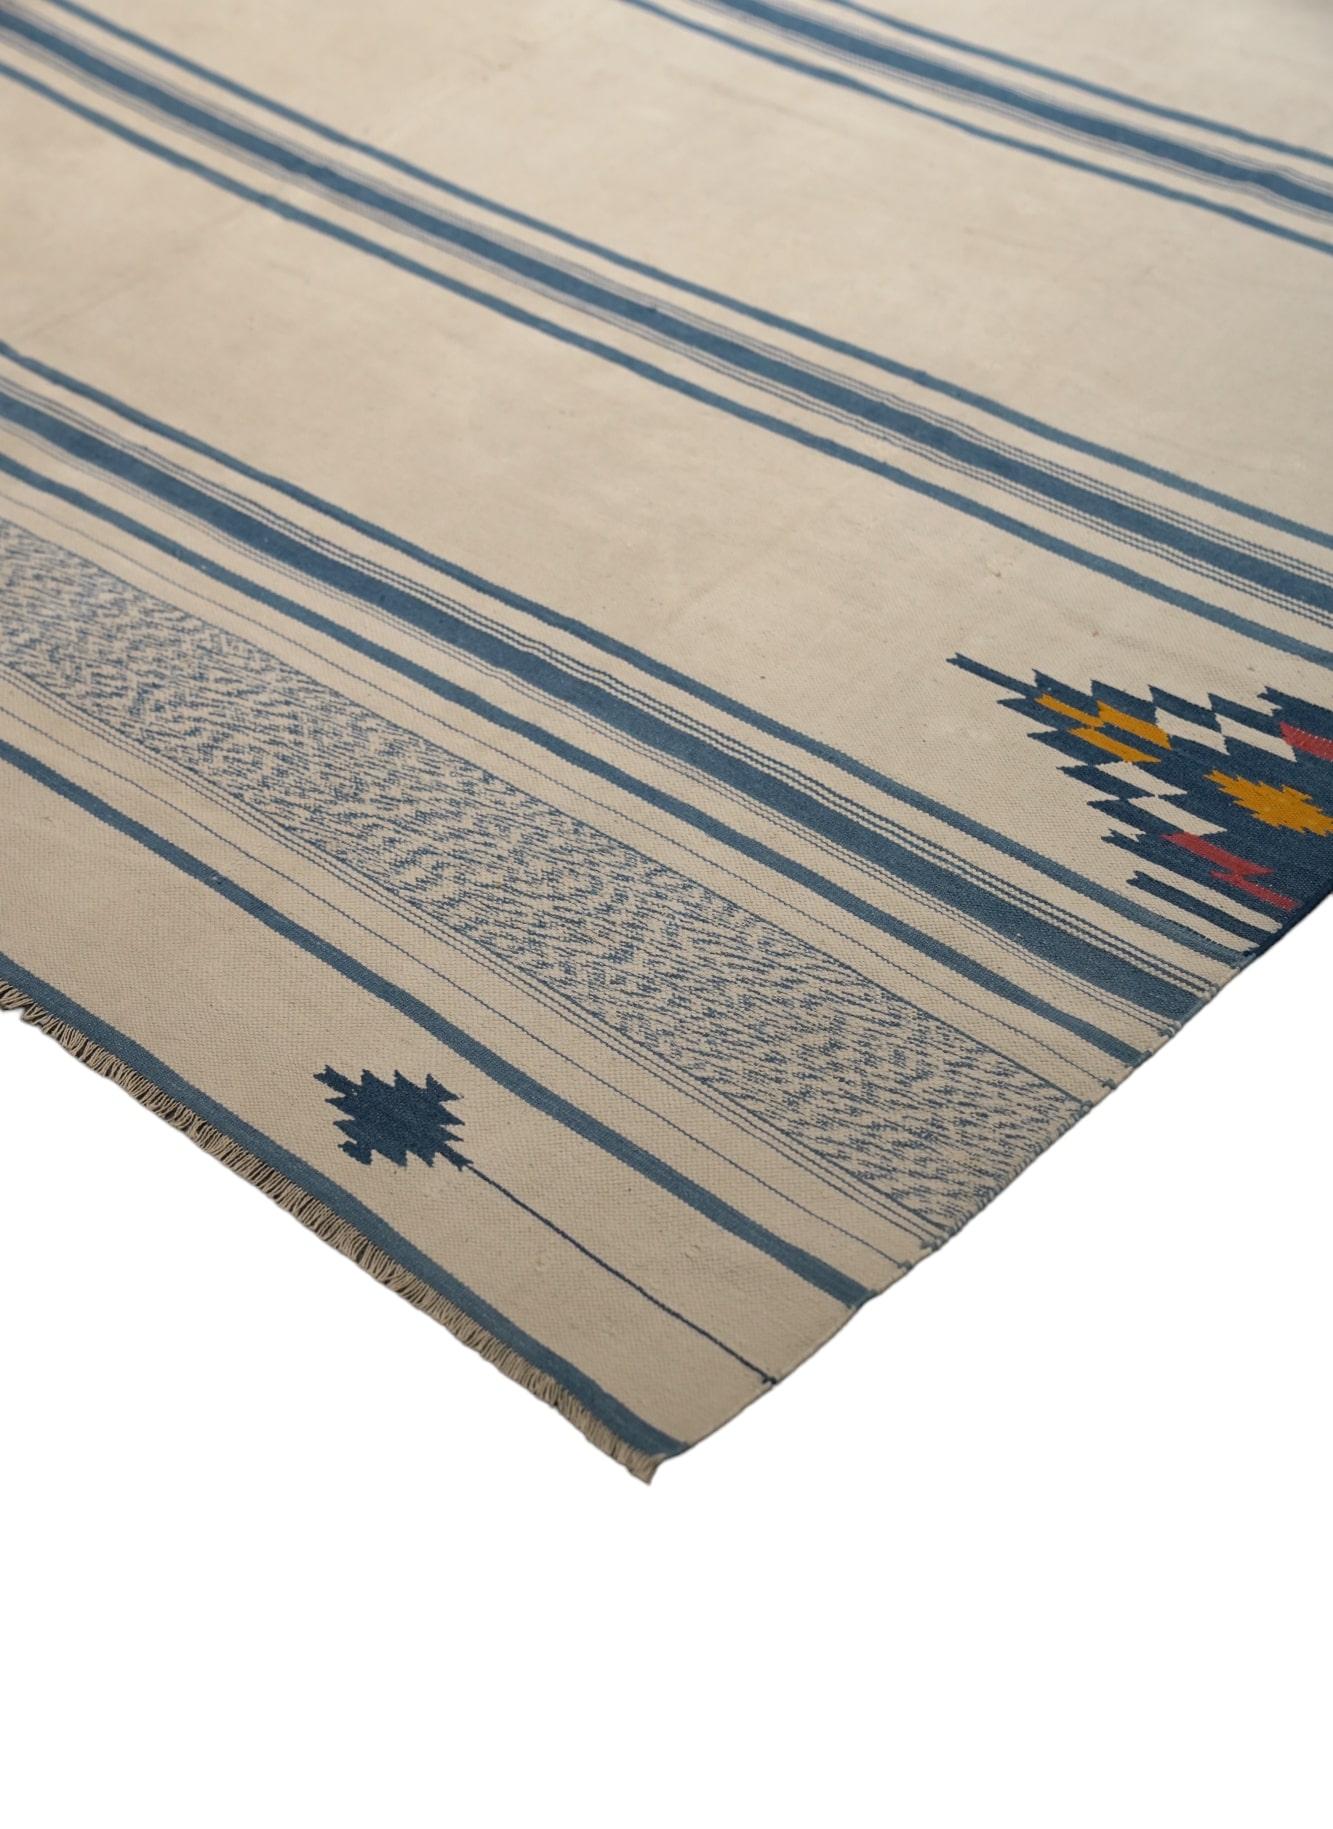 Vintage Dhurrie Rug in Blue and Beigewith Stripes, from Rug & Kilim In Good Condition For Sale In Long Island City, NY